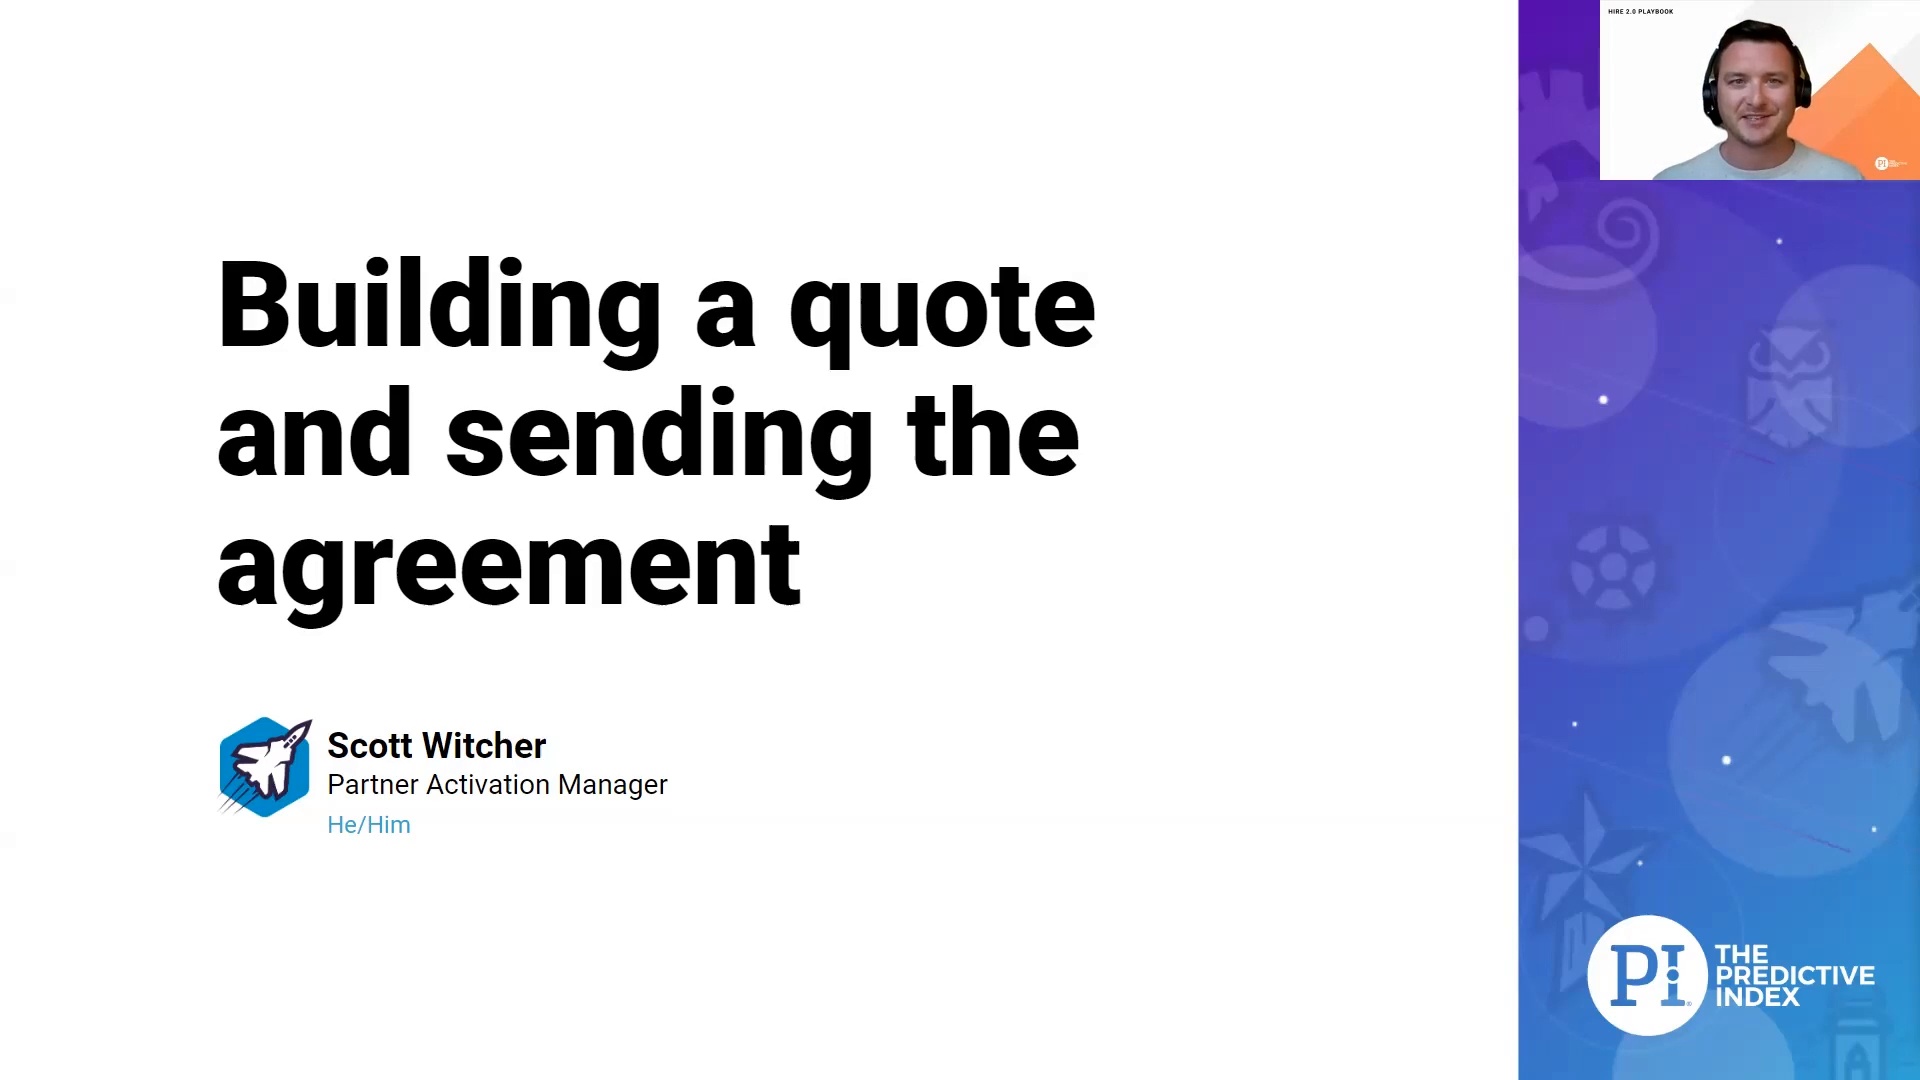 Building a quote and sending the agreement